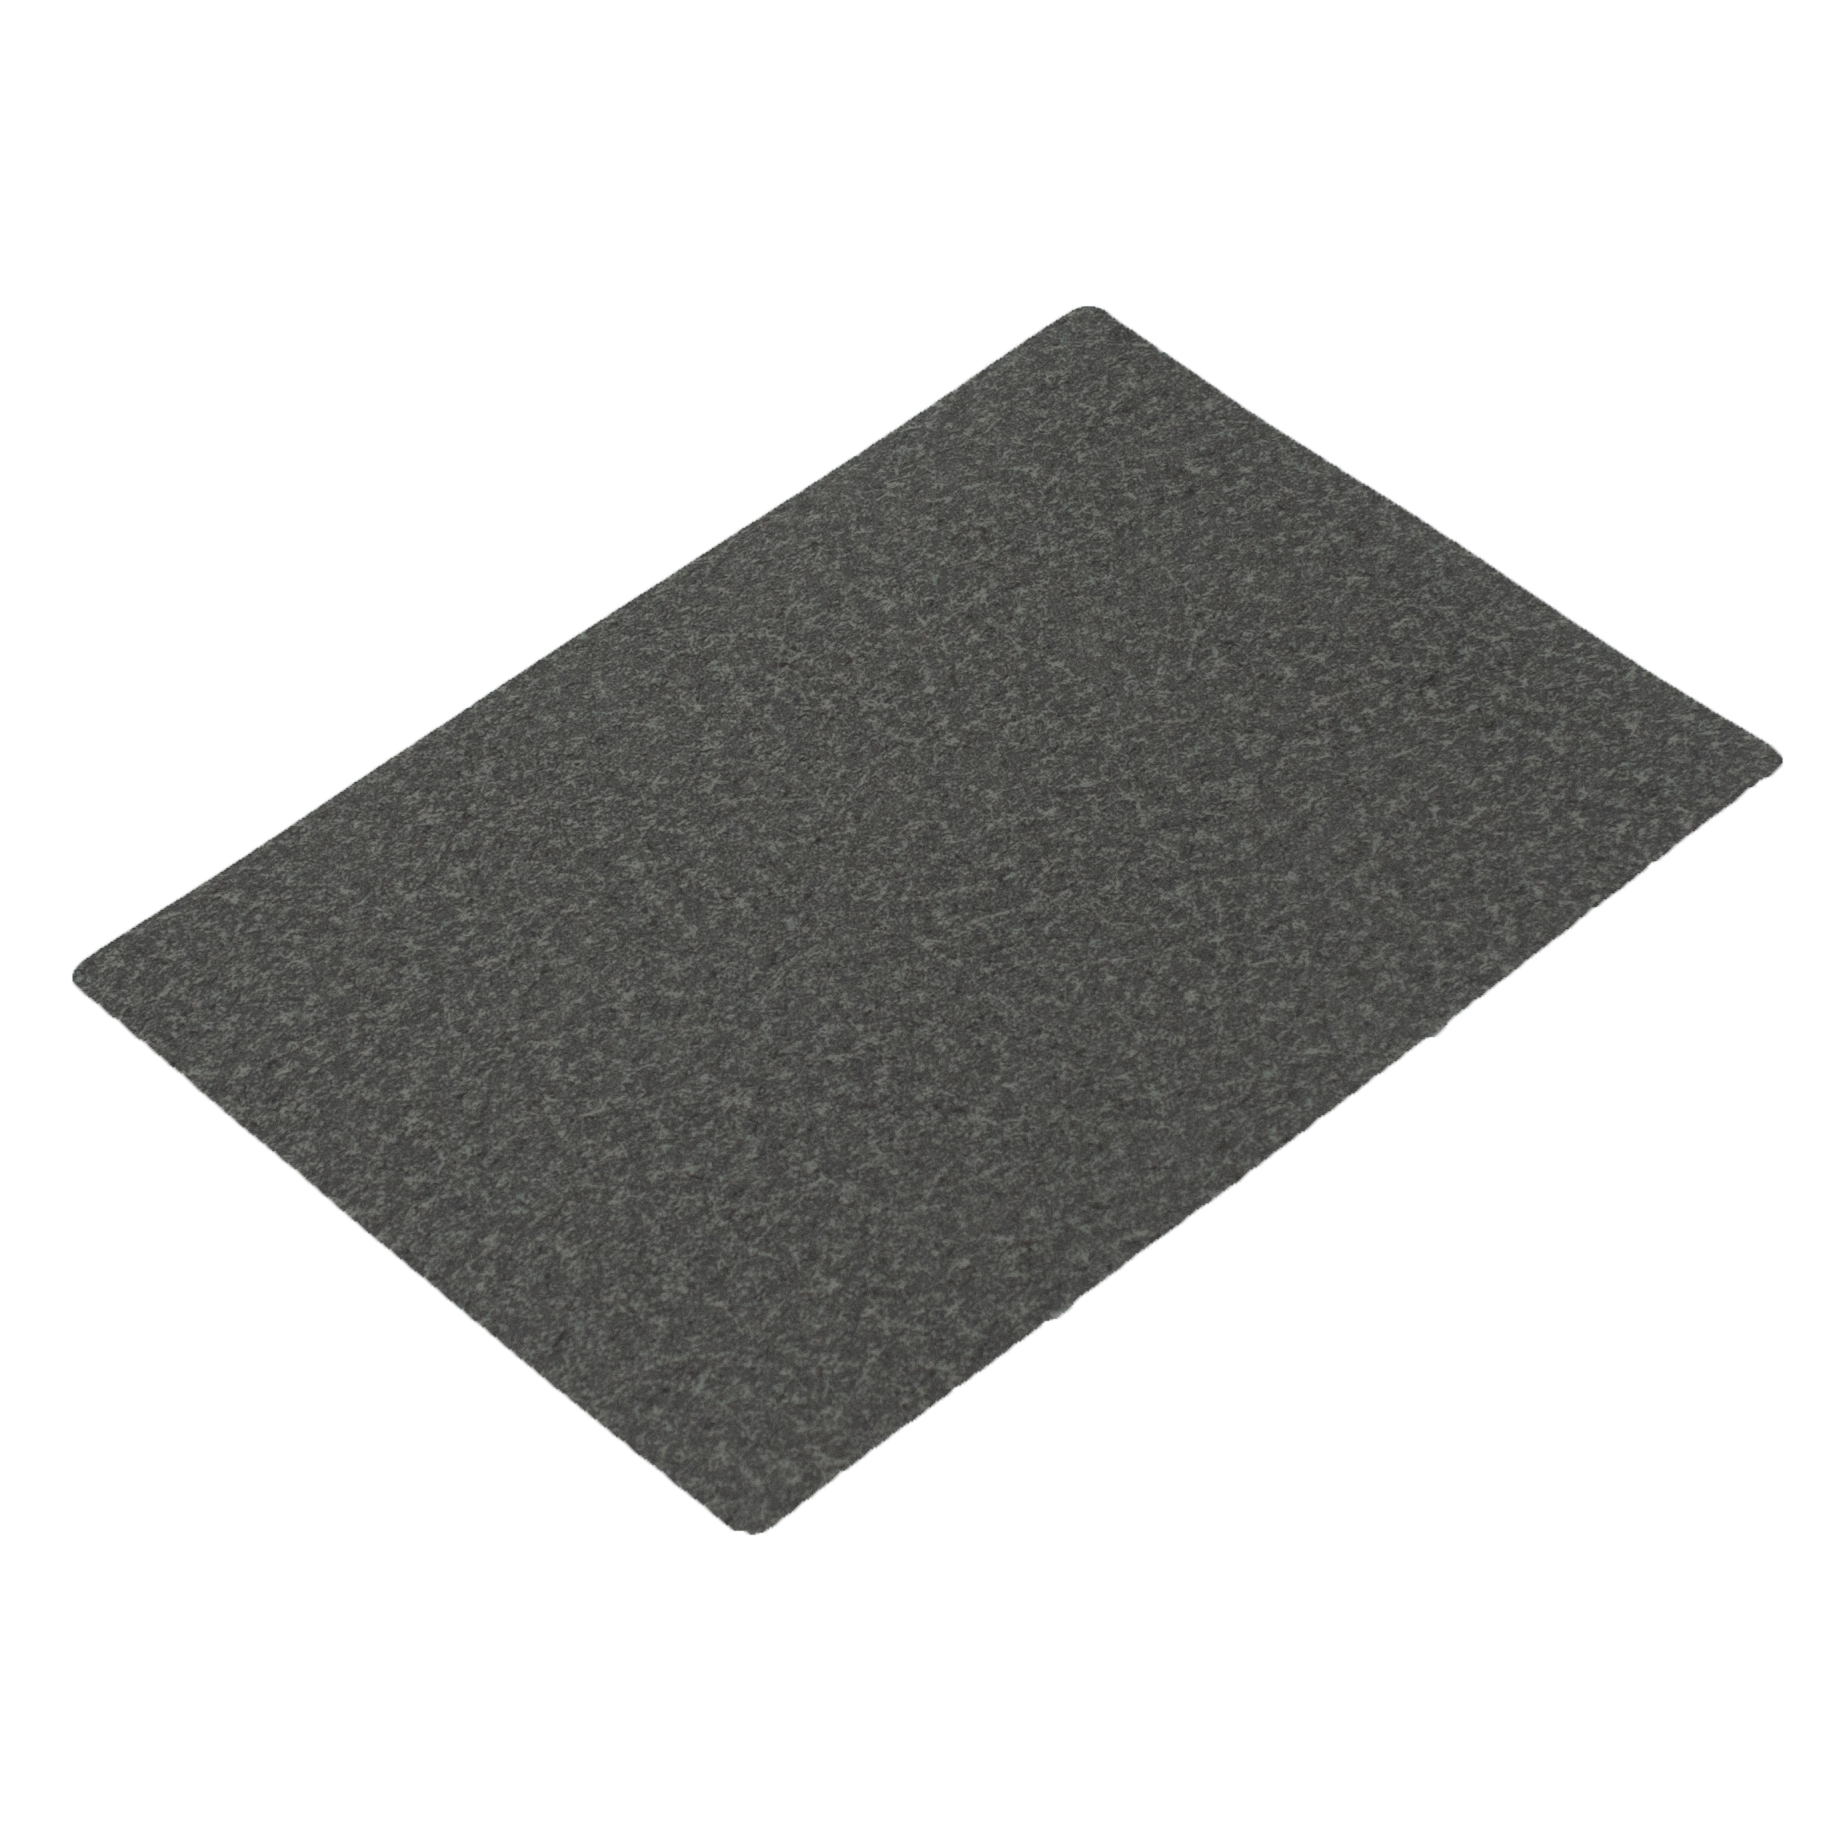 ESD Cleanroom Workshop Antistatic Anti-Fatigue PVC Flooring for Industrial Use